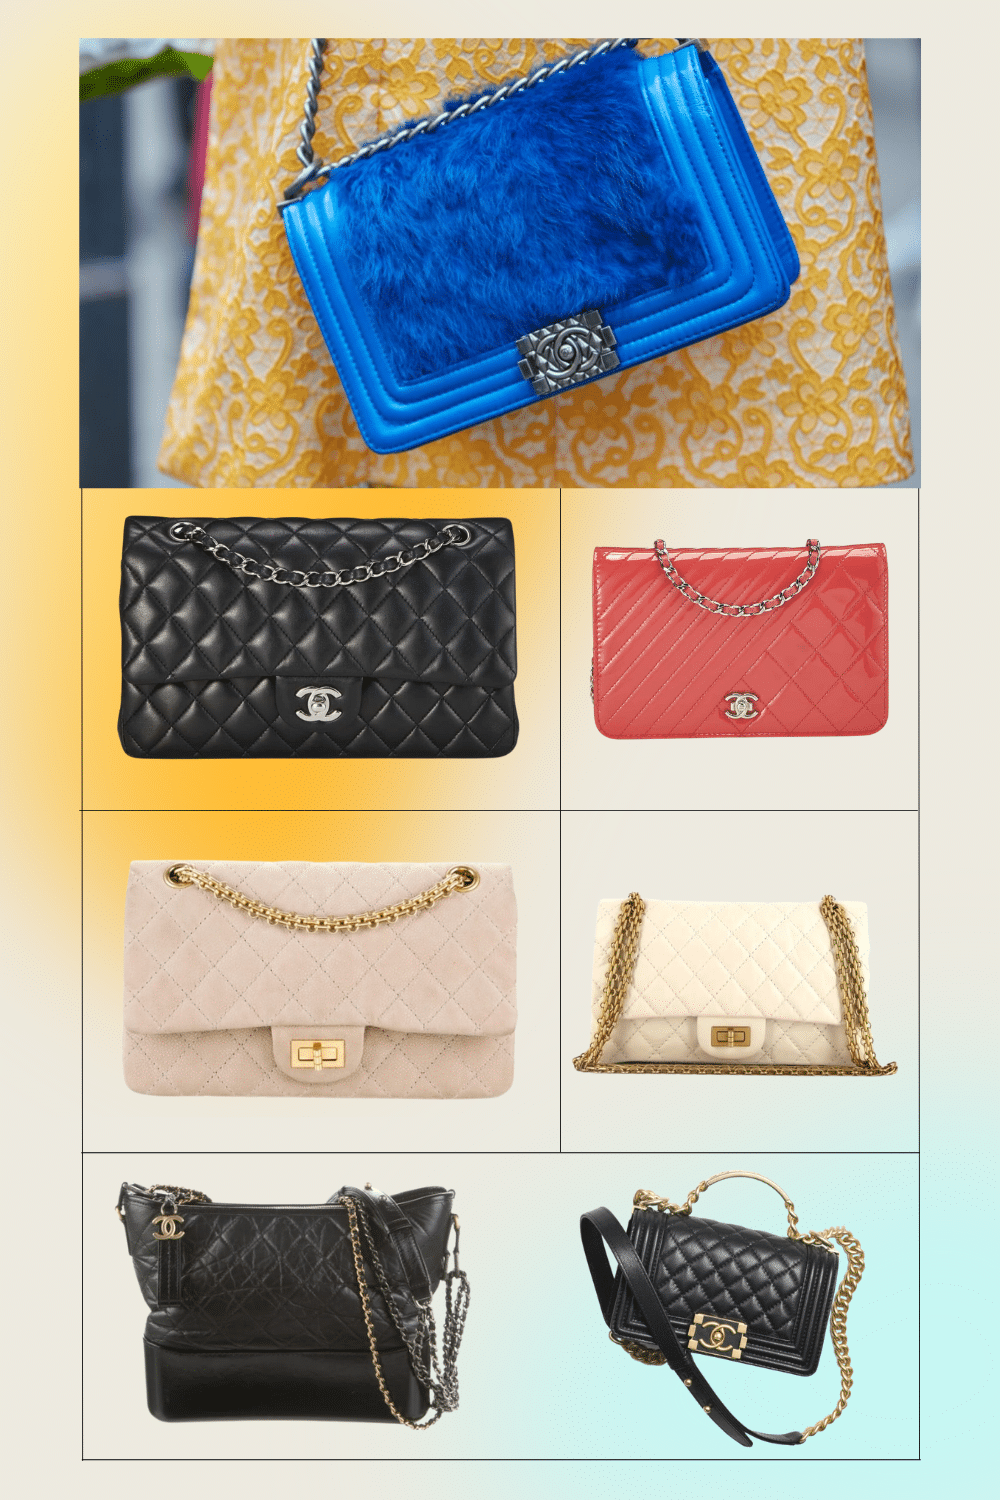 The Best Chanel Bags to Invest in for 2023: Timeless Elegance & Style